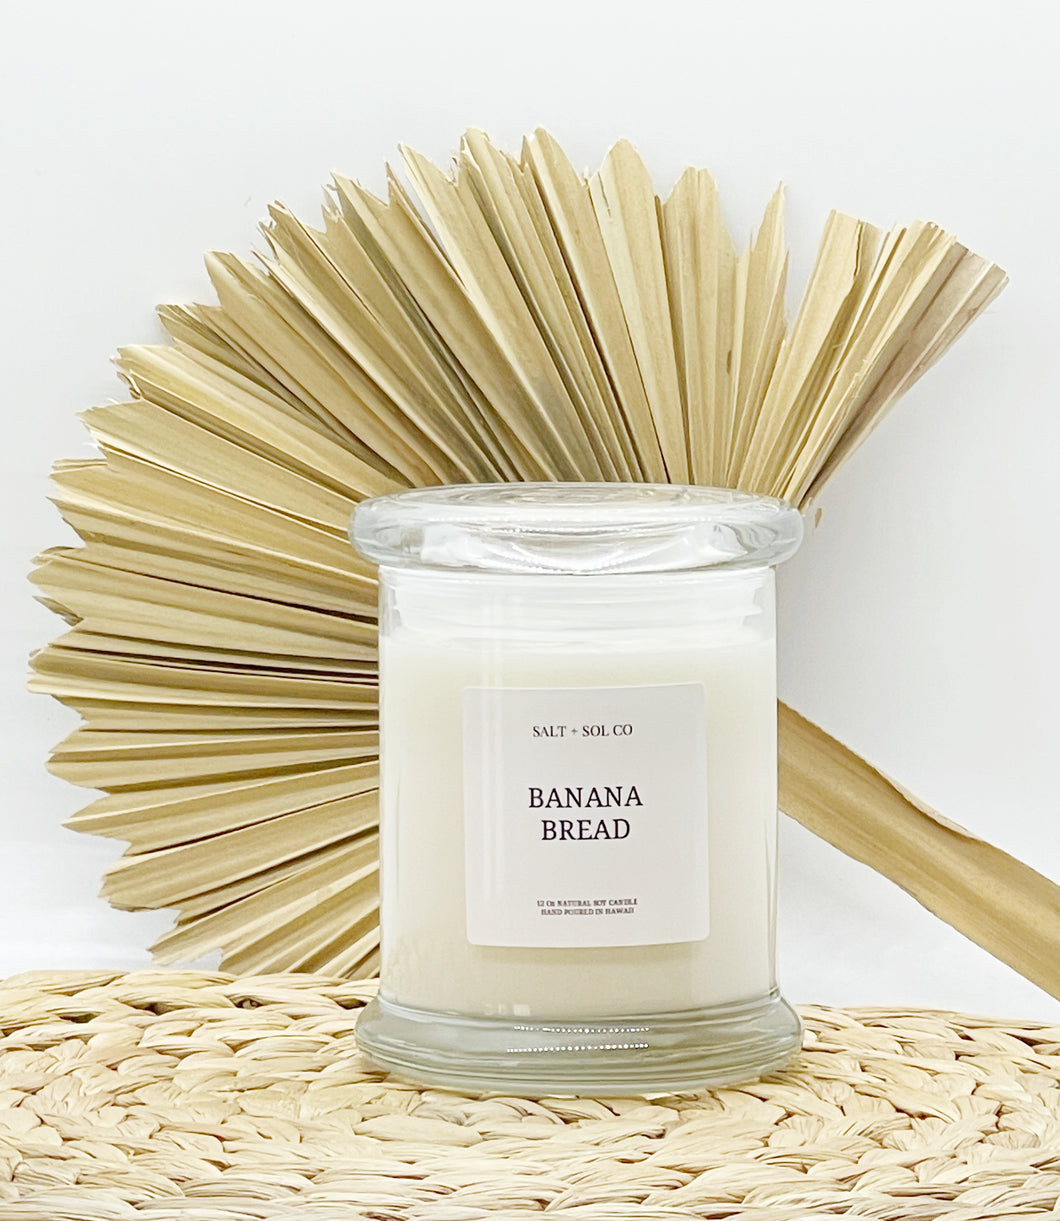 Luxury Banana bread soy wax candle for purchase at salt + SOL co candles